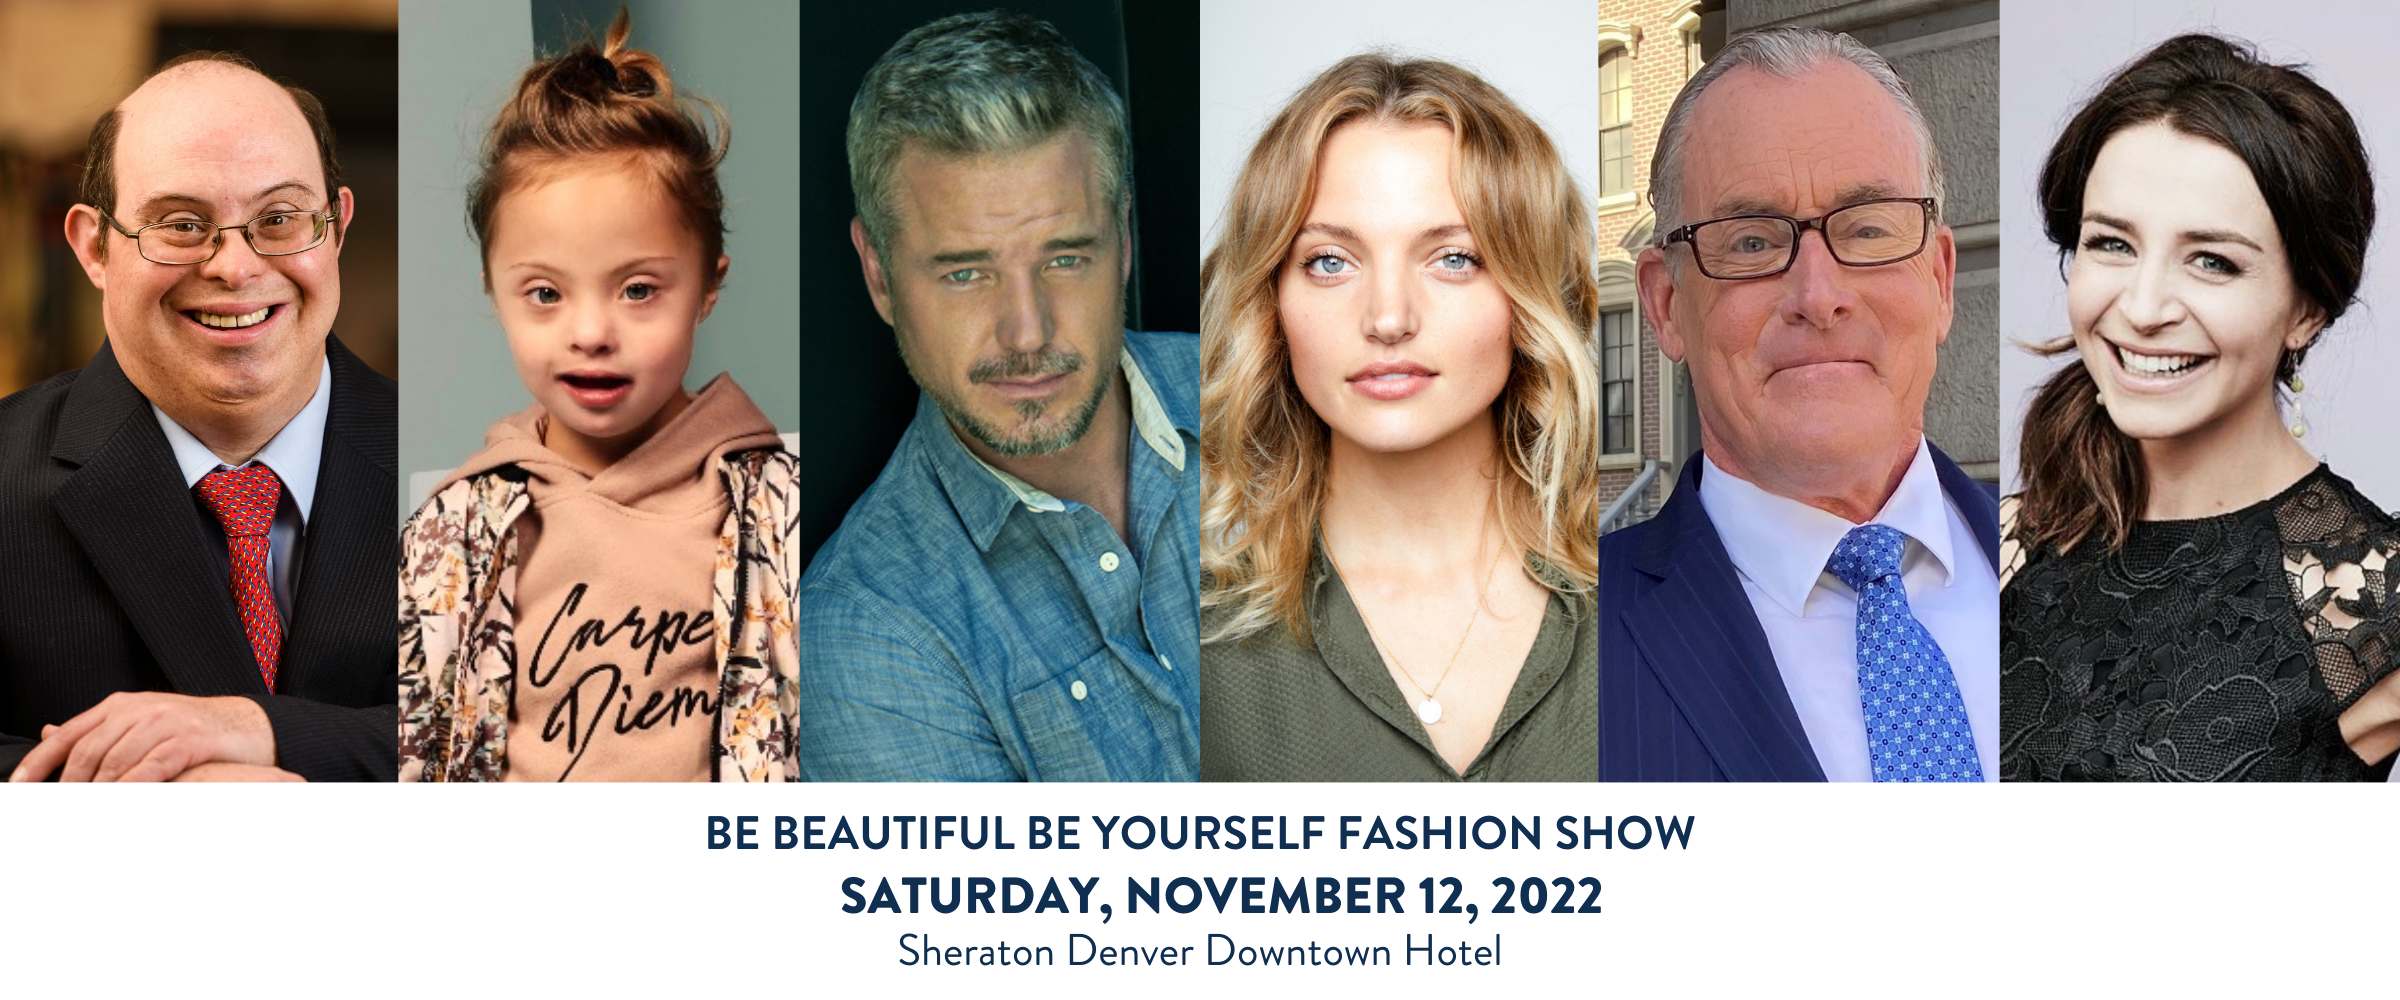 GLOBAL’s Be Beautiful Be Yourself Fashion Show Attracts Celebrities, Honors GLOBAL Ambassador Micah Quinones and Quincy Jones Exceptional Advocacy Awardees – Actor Eric Dane and Author & Self-Advocate David Egan